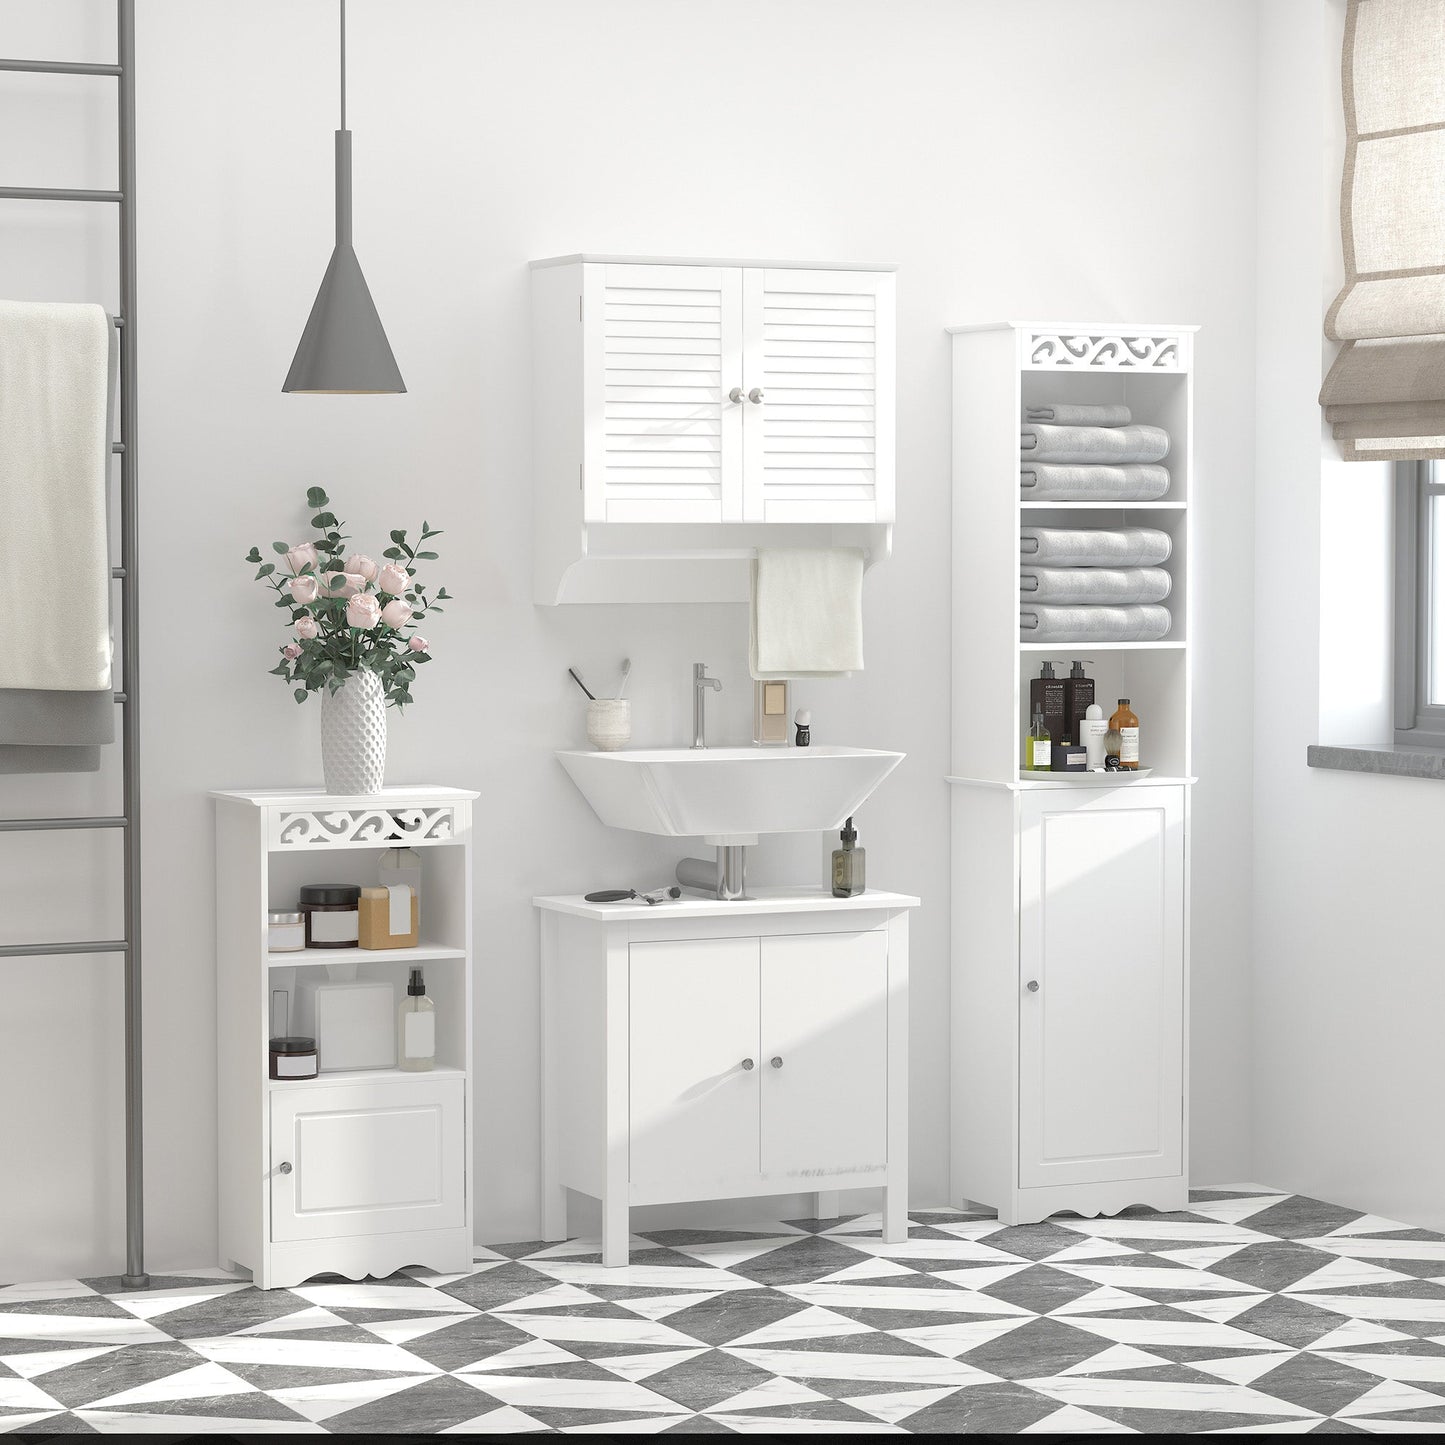 Medicine Cabinet, Concise Bathroom Wall Cabinet with 2 Shutter Doors, Shelf and Towel Rod, White at Gallery Canada